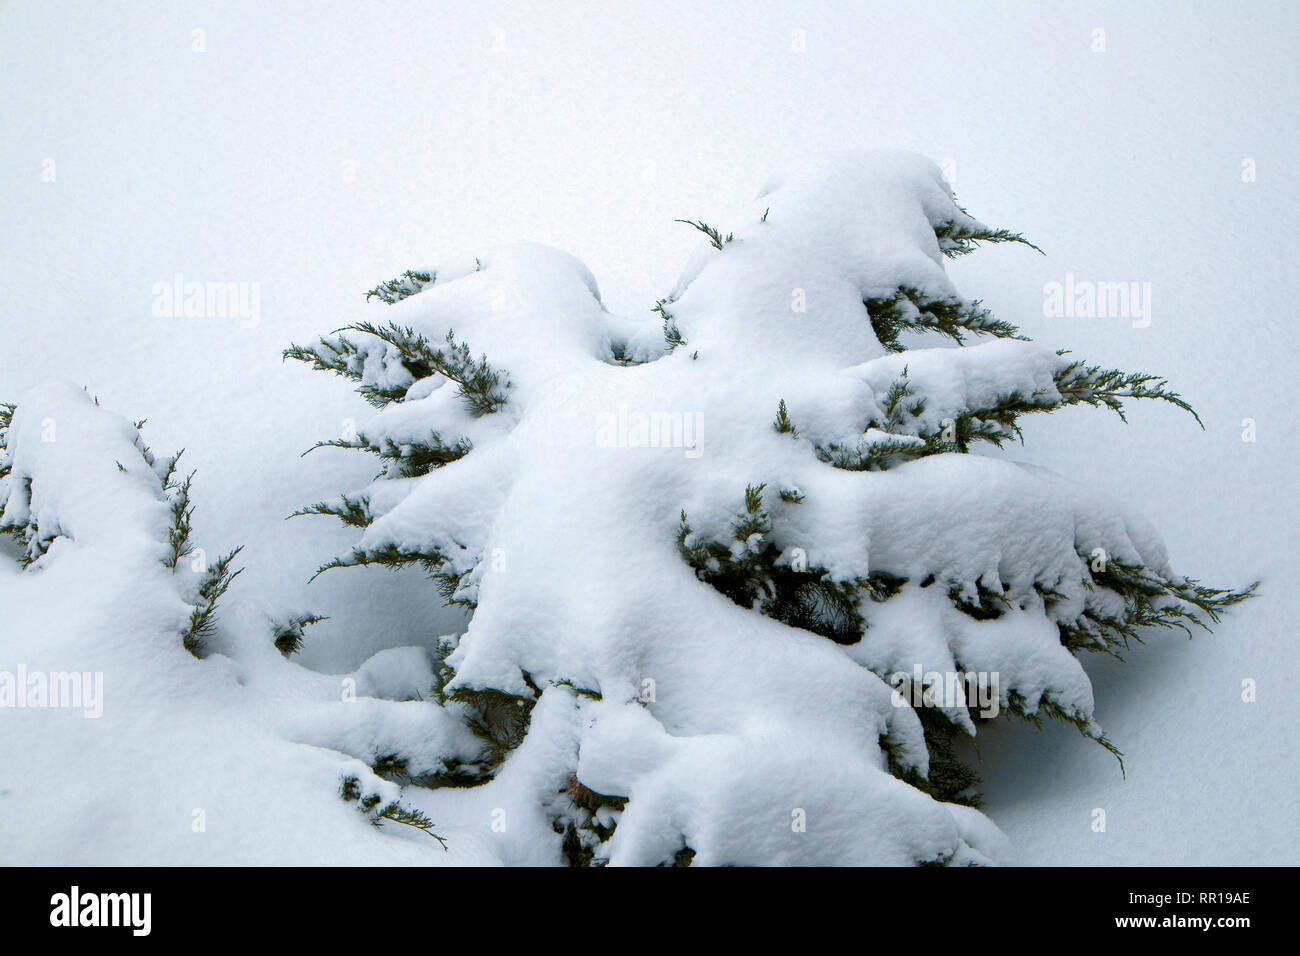 Winter garden, frozen thuja branches covered with snow close up. Winter mood Stock Photo